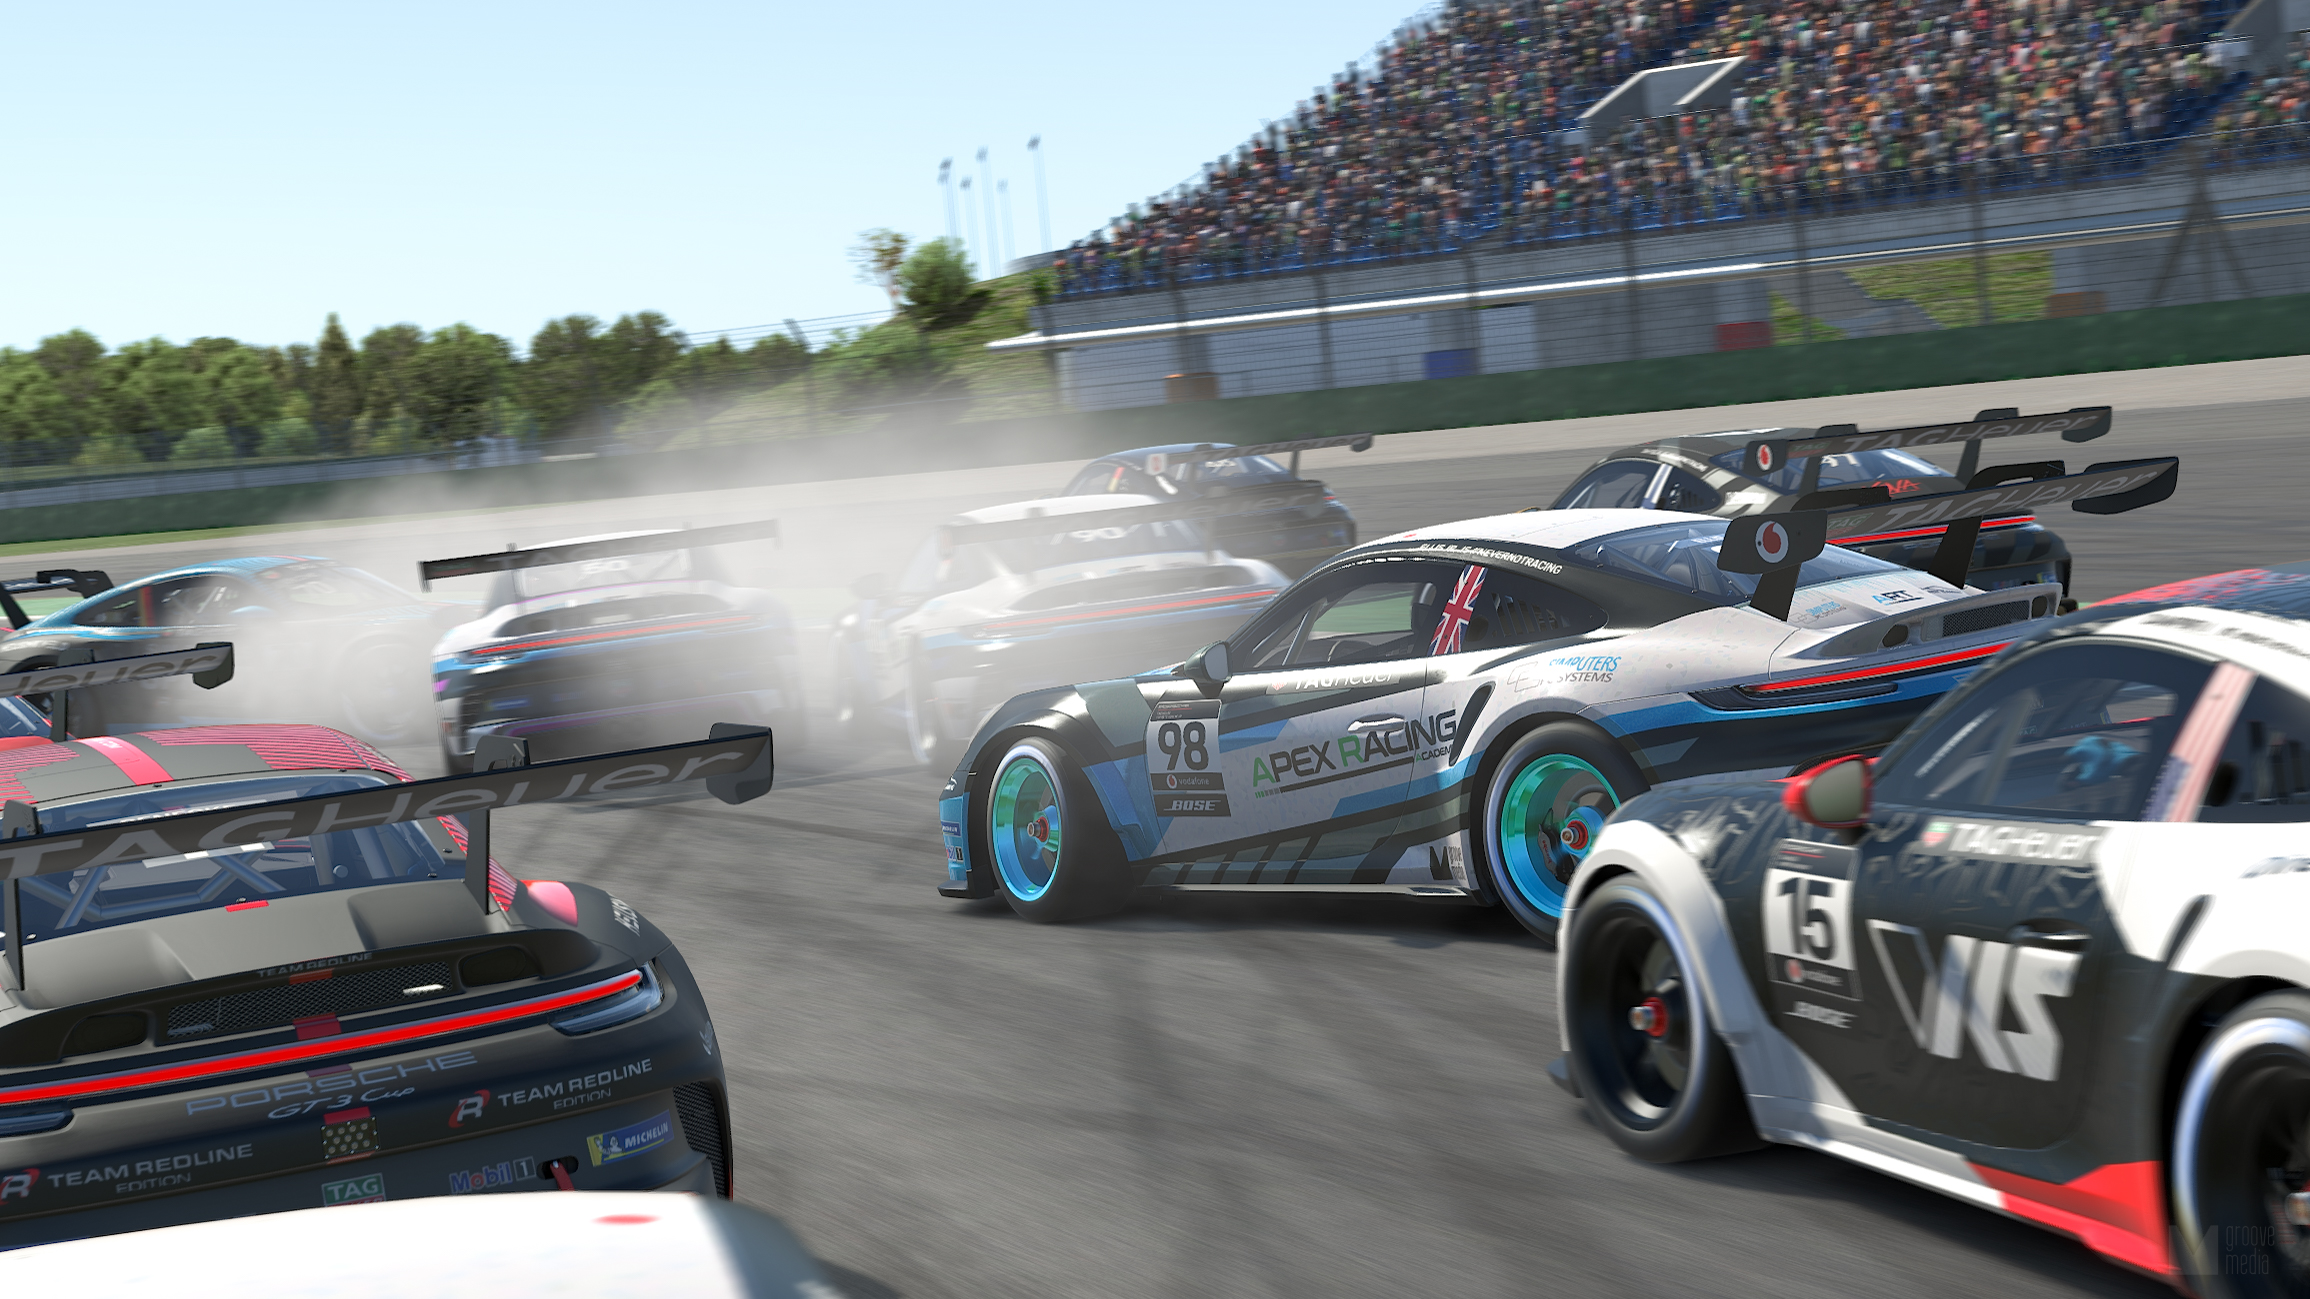 Action from Round 1 of the 2022 Porsche TAG Heuer eSports Supercup on iRacing #pesc